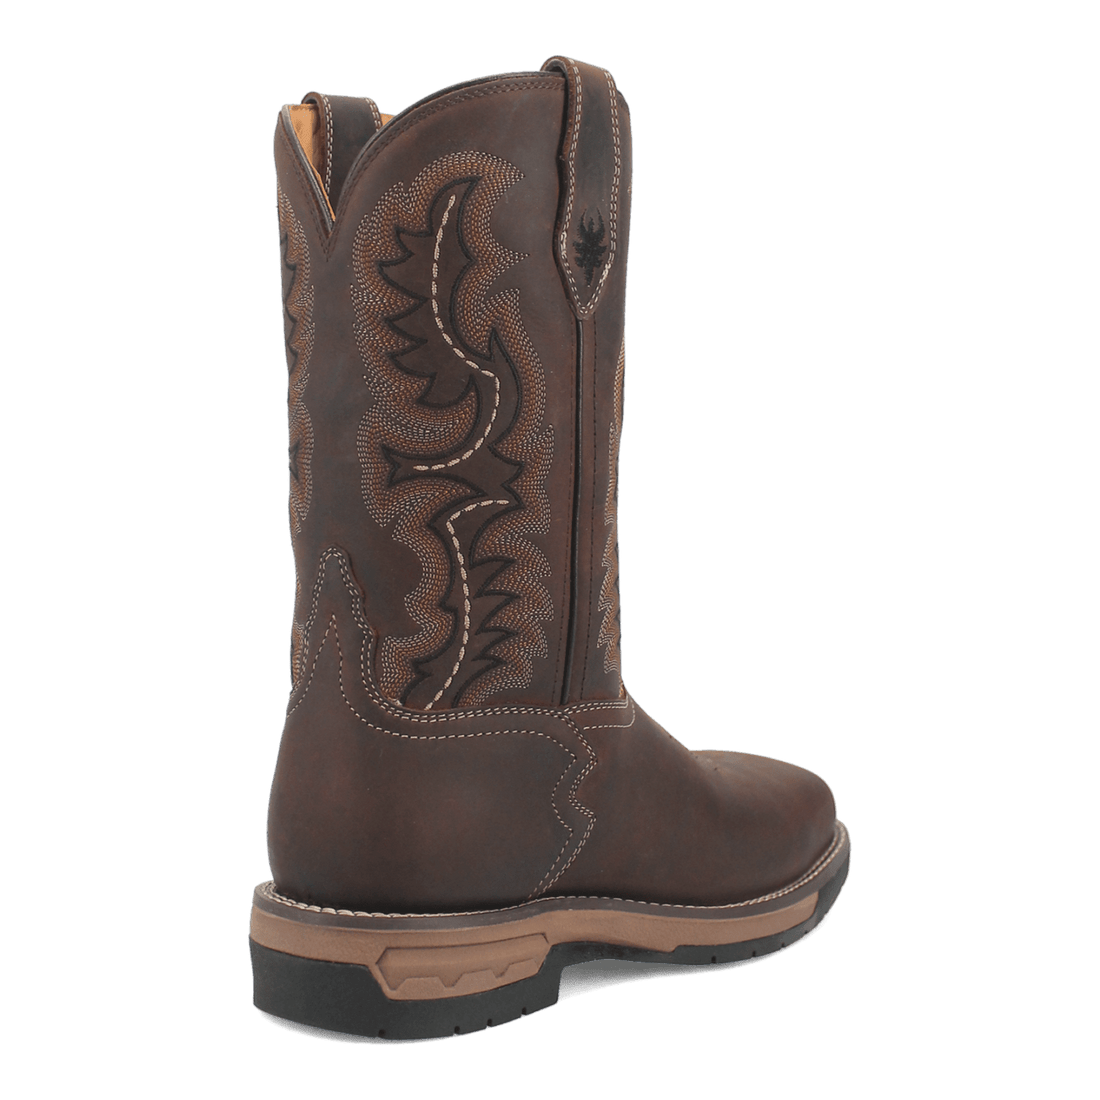 STRINGFELLOW STEEL TOE LEATHER BOOT Preview #11